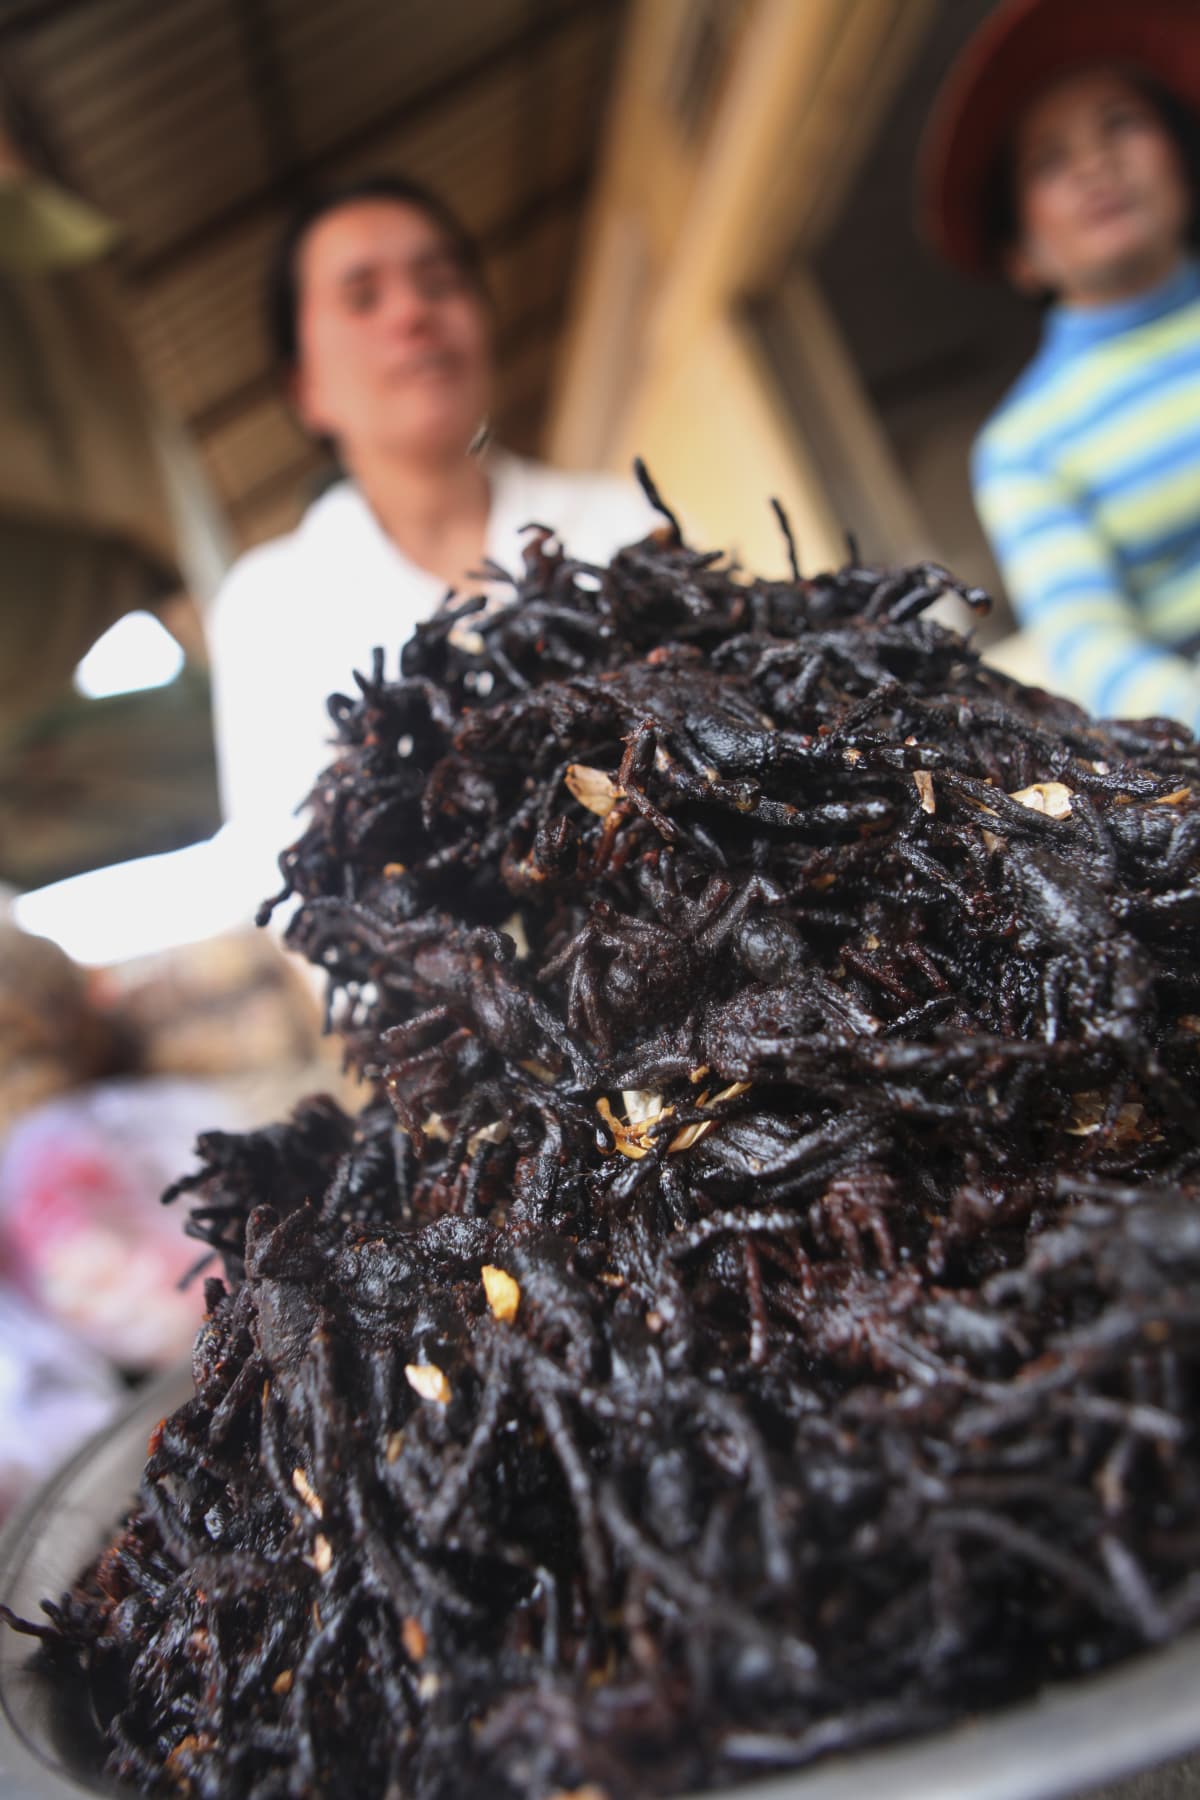 This photo taken on March 14, 2018 shows a live tarantula crawling across a man's shirt with a Cambodian flag at Skun town in Kampong Cham province.
While a plate piled high with hairy, palm-sized tarantulas is the stuff of nightmares for some, these garlic fried spiders are a coveted treat in Cambodia, where the only fear is that they may soon vanish due to deforestation and unchecked hunting. / AFP PHOTO / TANG CHHIN Sothy / TO GO WITH AFP STORY: CAMBODIA-LIFESTYLE-TARANTULAS-TOURISM-ENVIRONMENT-FOOD; Feature by SUY SE        (Photo credit should read TANG CHHIN SOTHY/AFP via Getty Images)